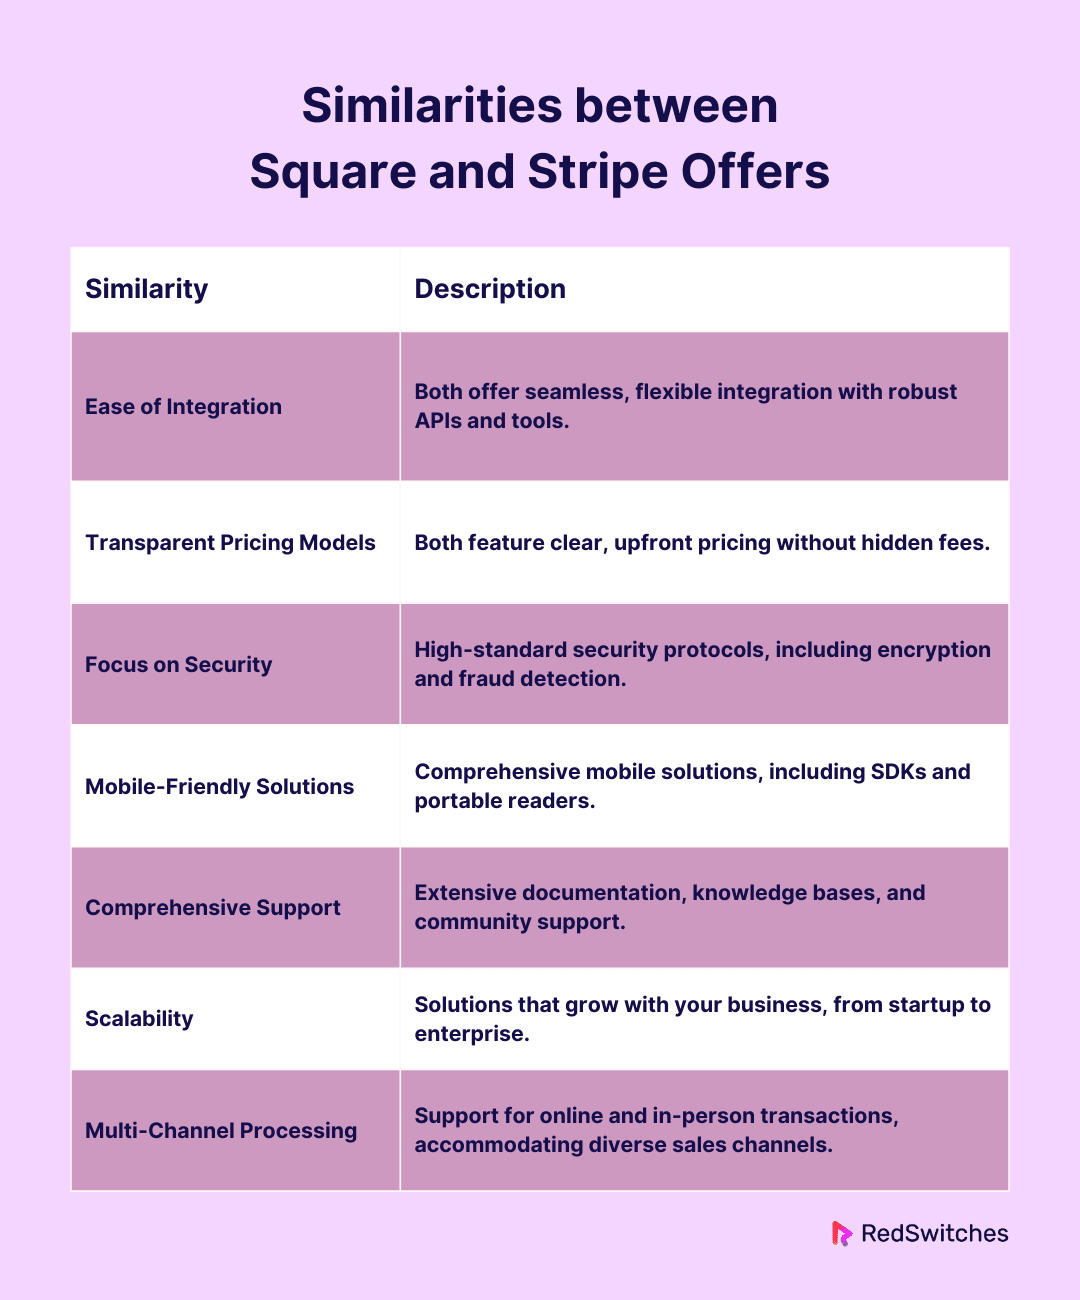 Similarities between Square and Stripe Offers